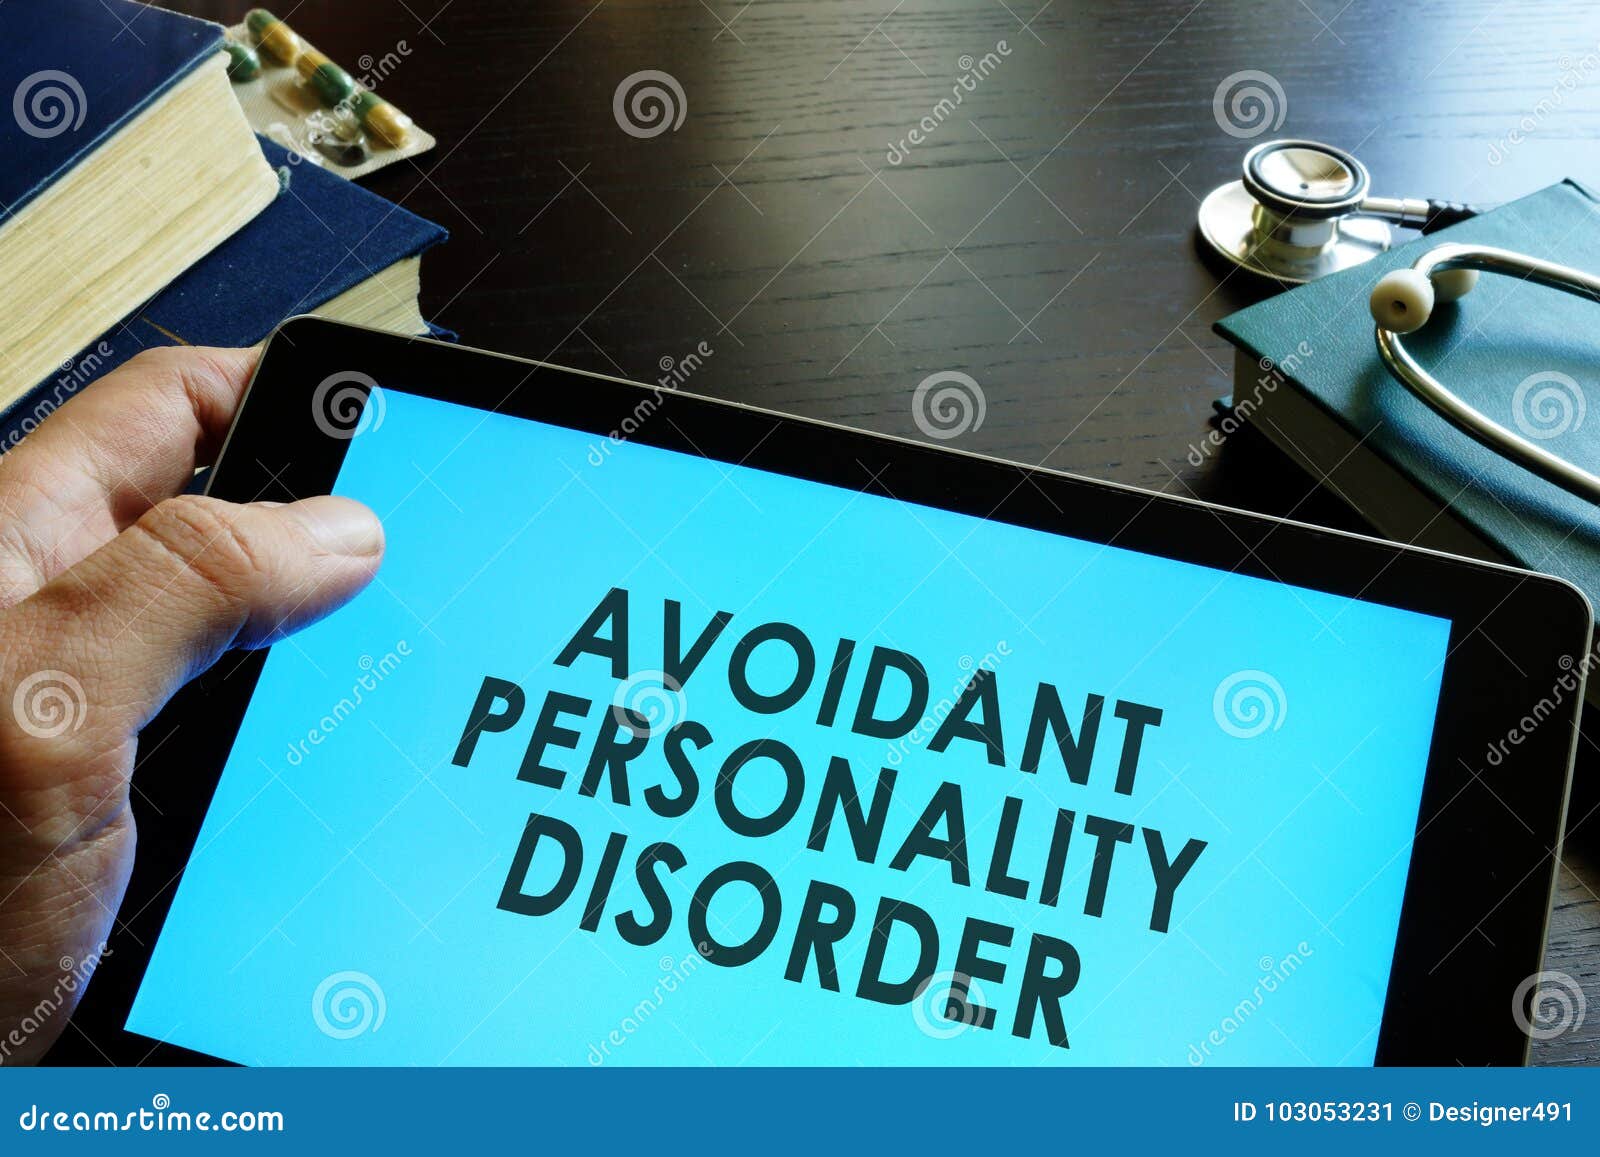 Personality what disorder avoidant is Avoidant vs.